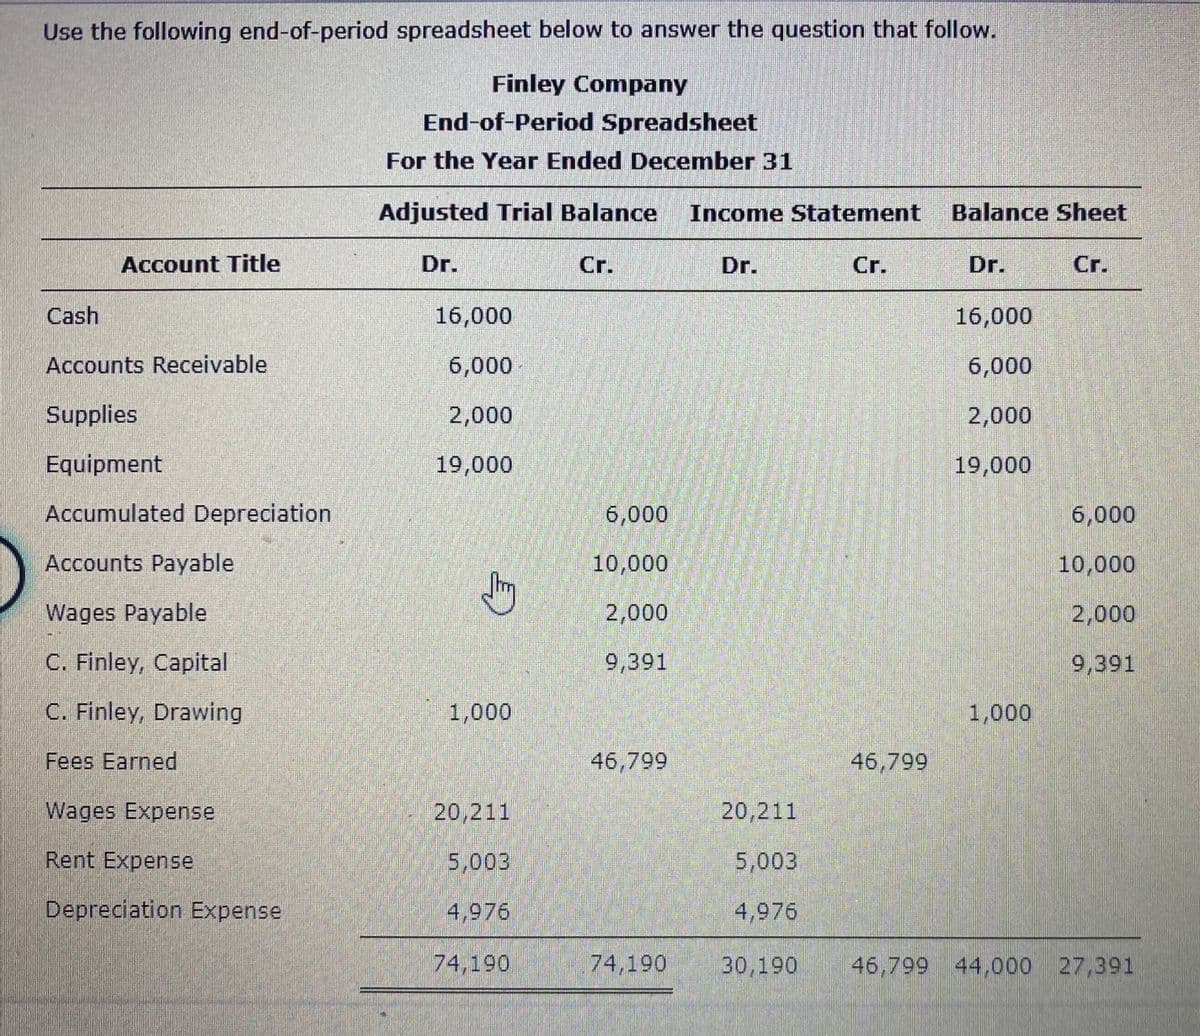 Use the following end-of-period spreadsheet below to answer the question that follow.
Finley Company
End-of-Period Spreadsheet
For the Year Ended December 31
Adjusted Trial Balance
Income Statement
Balance Sheet
Account Title
Dr.
Cr.
Dr.
Cr.
Dr.
Cr.
Cash
16,000
16,000
Accounts Receivable
6,000
6,000
Supplies
2,000
2,000
Equipment
19,000
19,000
Accumulated Depreciation
6,000
6,000
Accounts Payable
10,000
10,000
Wages Payable
2,000
2,000
C. Finley, Capital
9,391
9,391
C. Finley, Drawing
1,000
1,000
Fees Earned
46,799
46,799
Wages Expense
20,211
20,211
Rent Expense
5,003
5,003
Depreciation Expense
4,976
4,976
74,190
74,190
30,190
46,799 44,000 27,391
